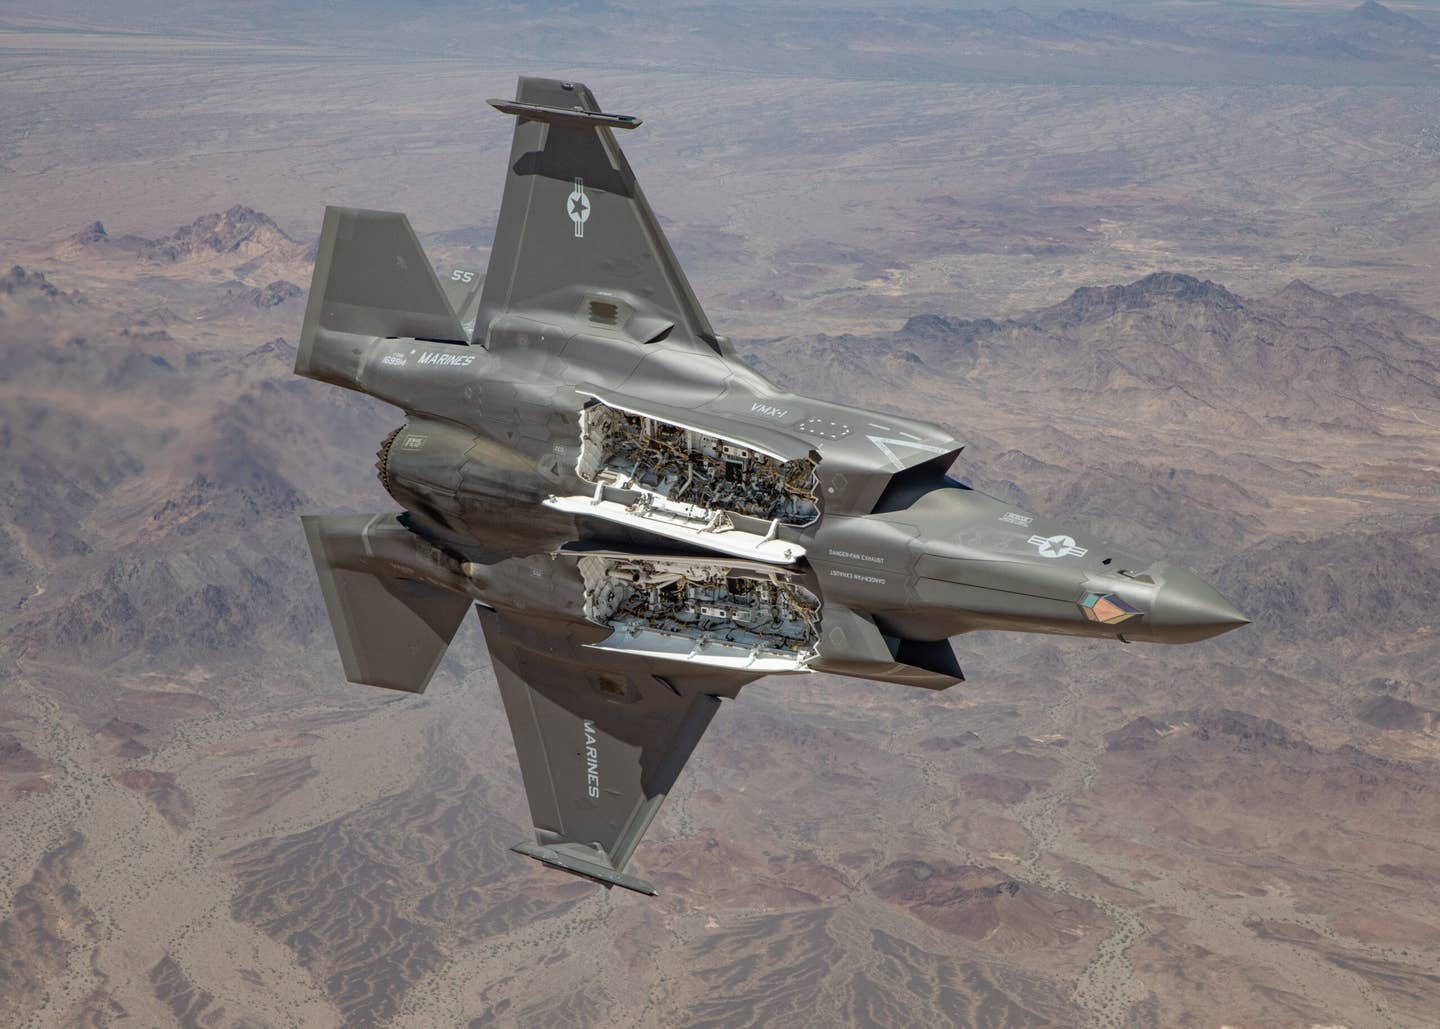 F-35B with its weapons bays open. (Author's image)